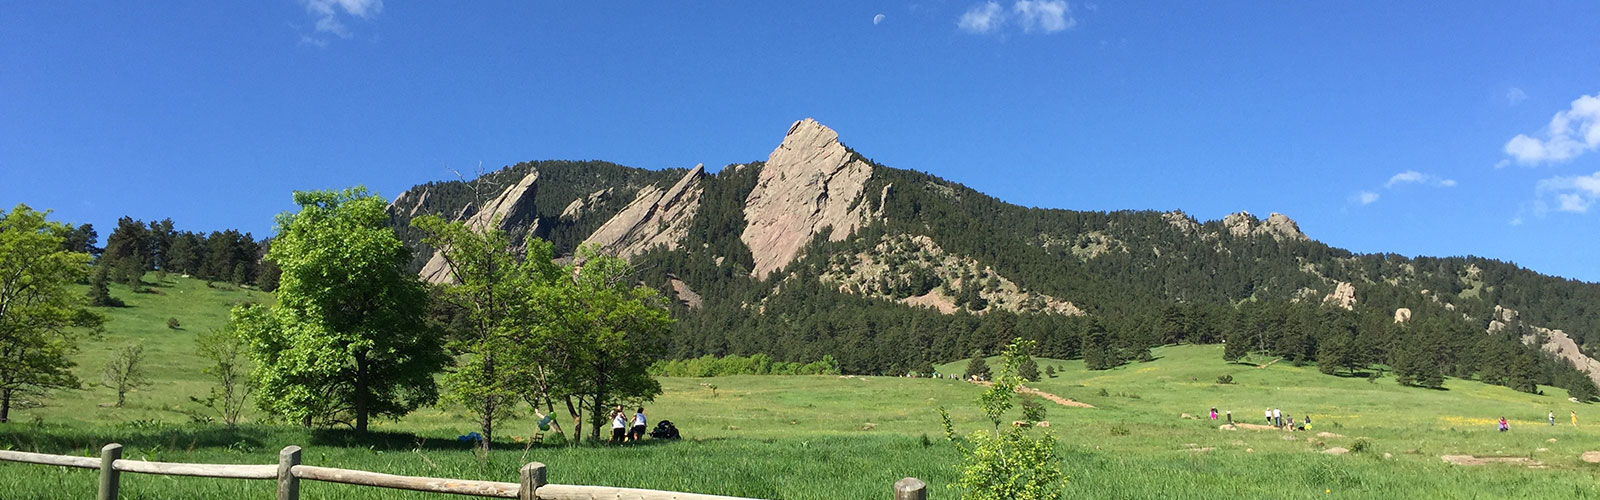 window-cleaning-boulder